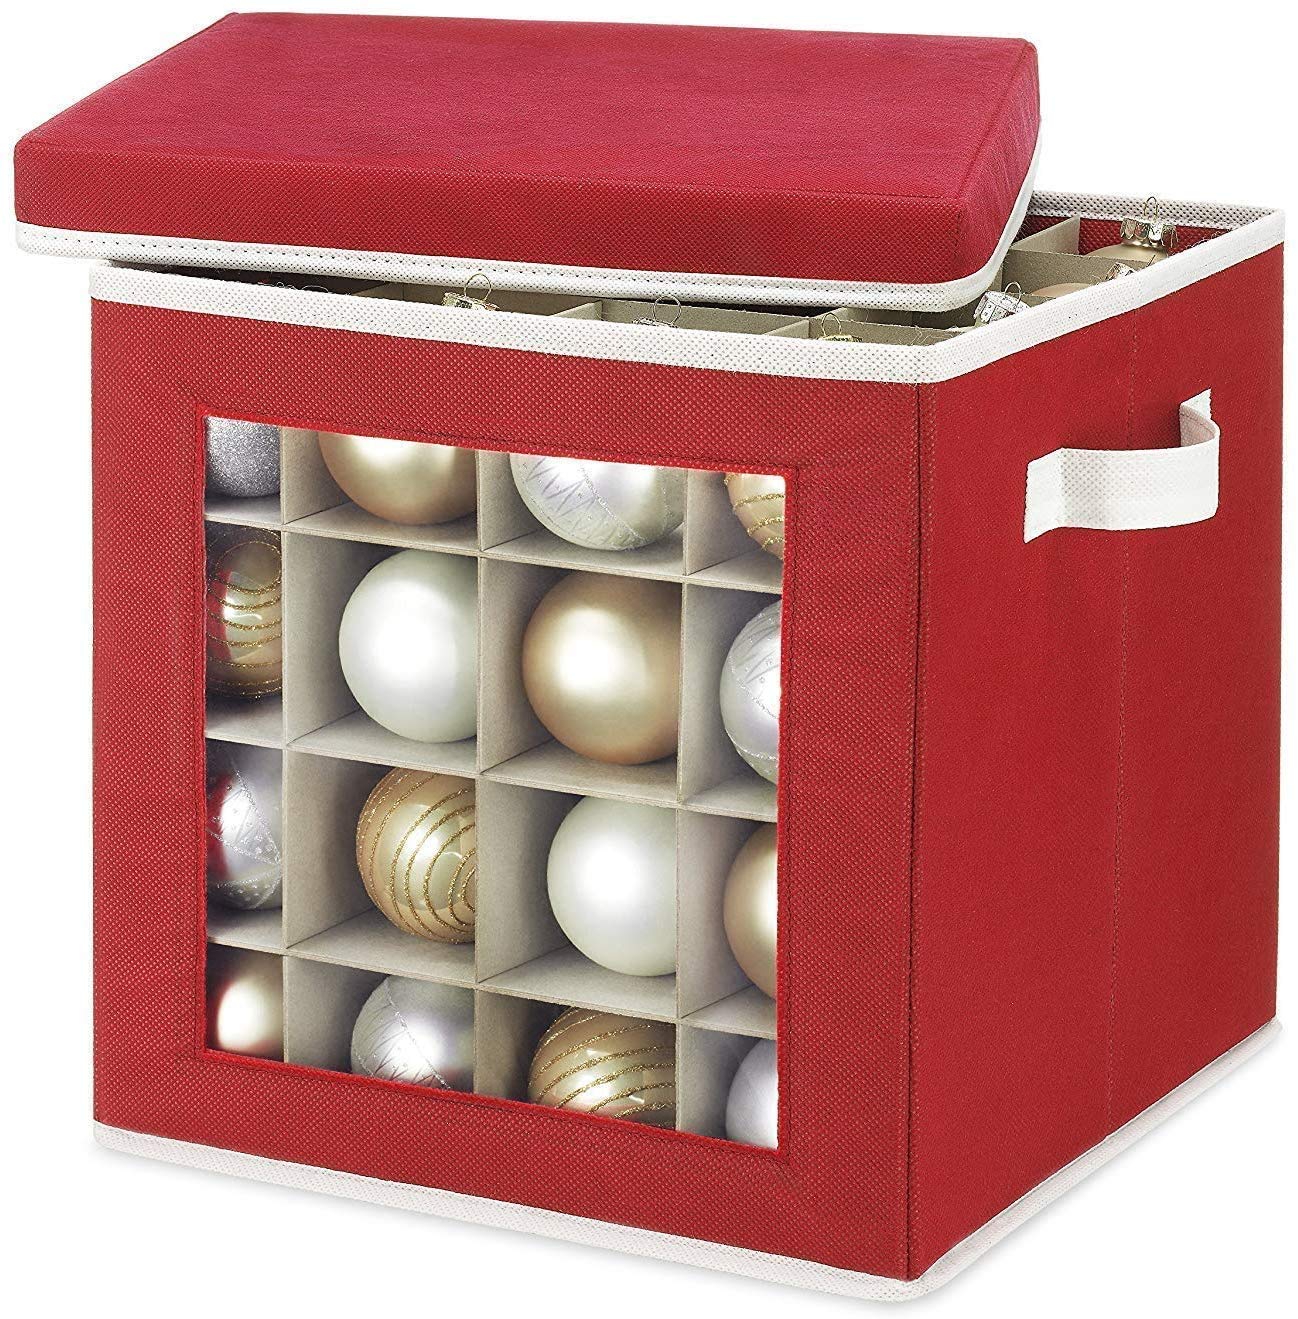 Whitmor Holiday Ornaments Storage Cube with 64 Individual Compartments - Made with Non-Woven Polypropylene Fabric - Transparent Cover for Easy Viewing - Removable Top and Convenient Handle  - Like New